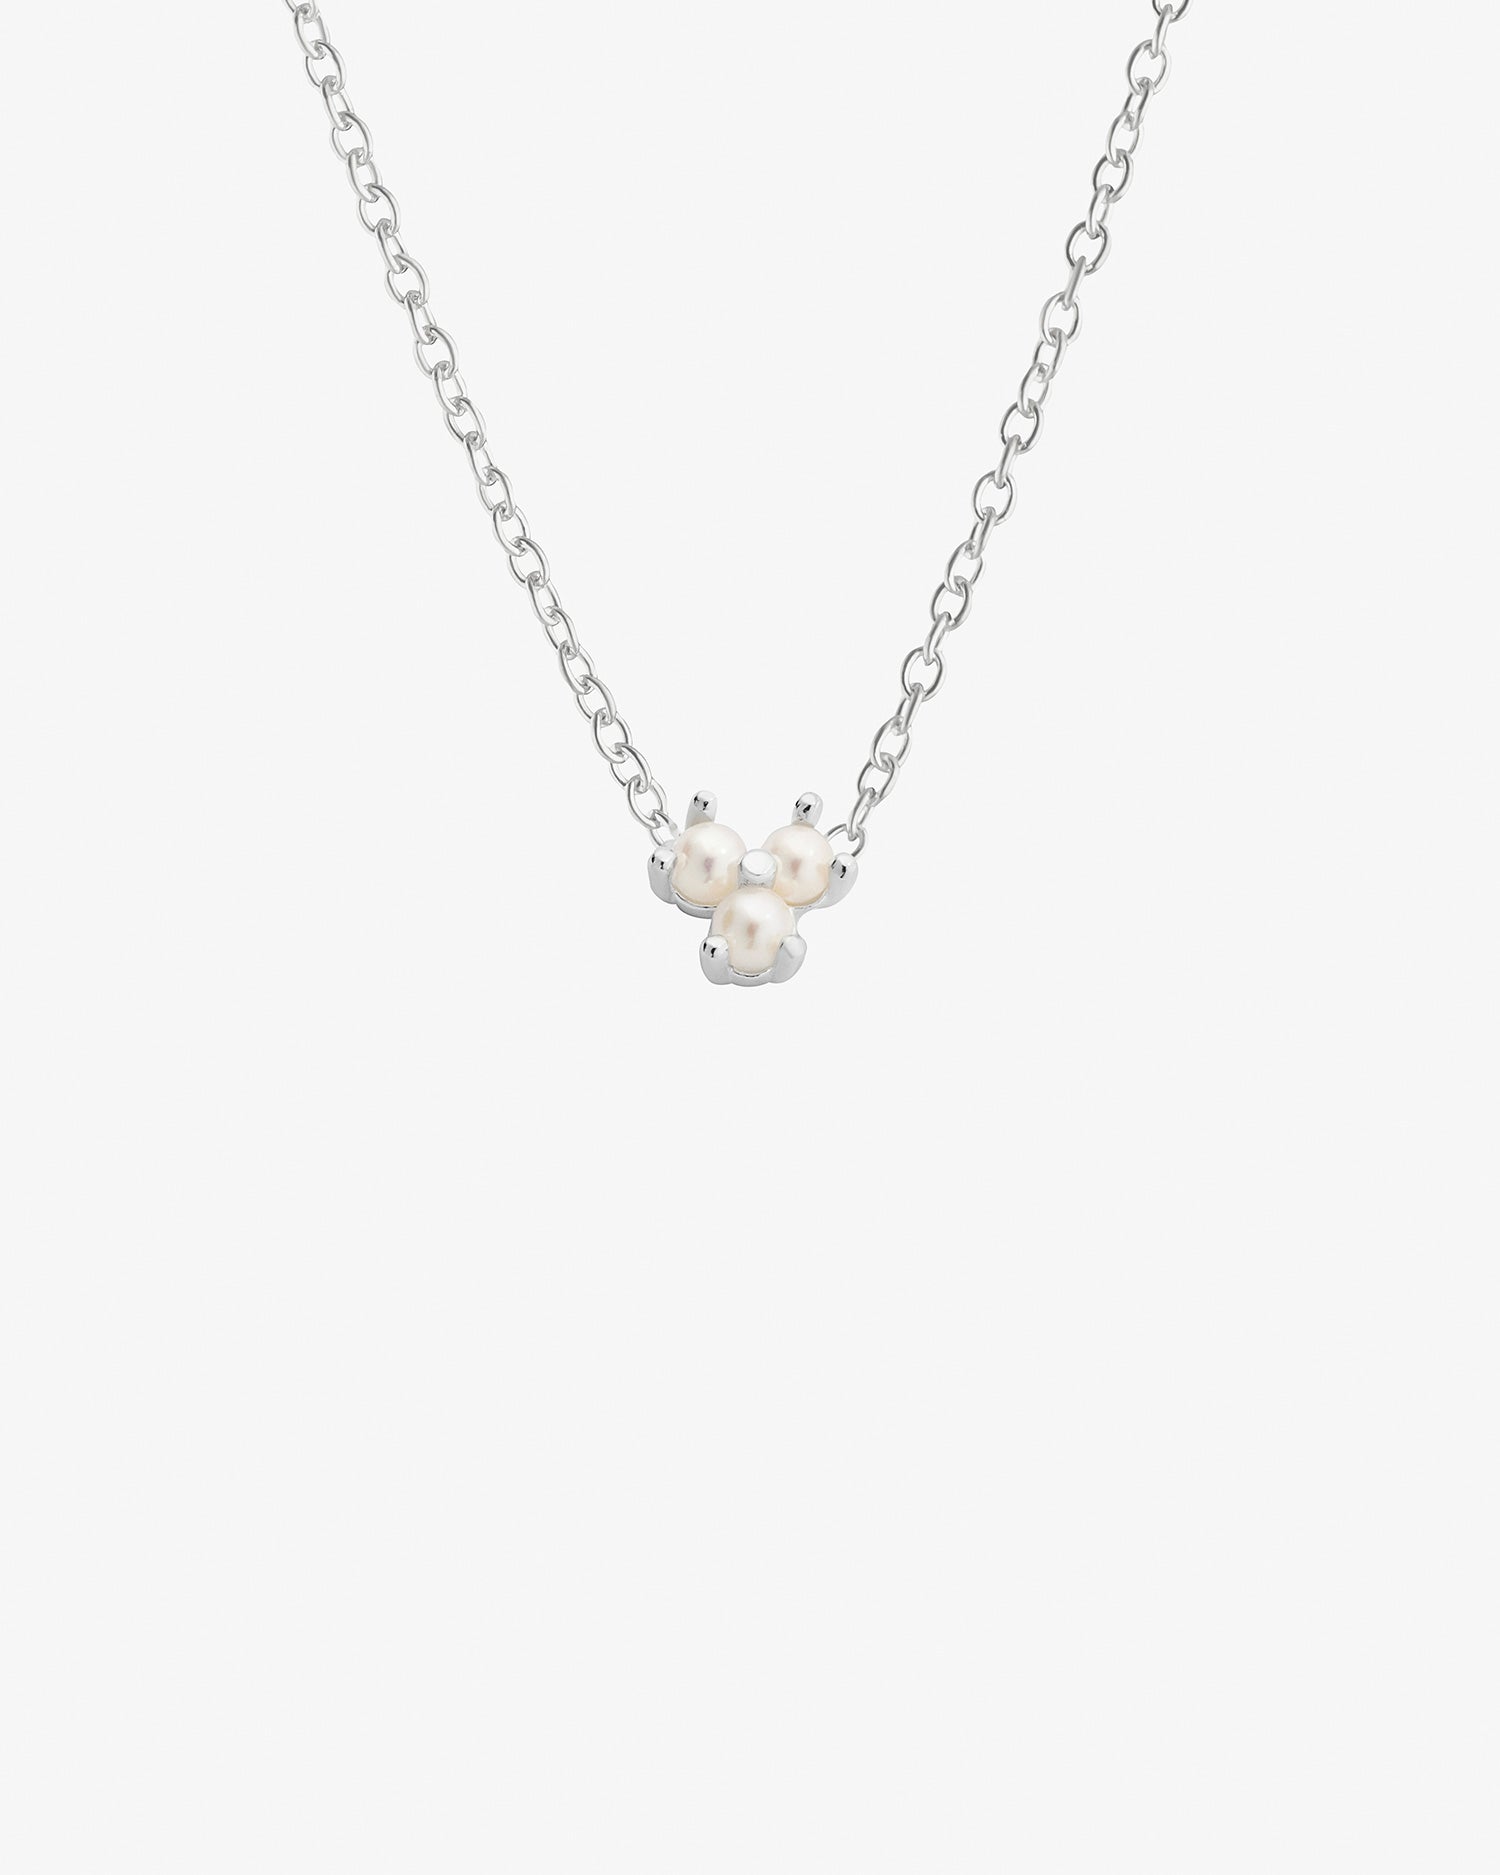 Diamond Star clasp on Cultured Saltwater Pearl necklace